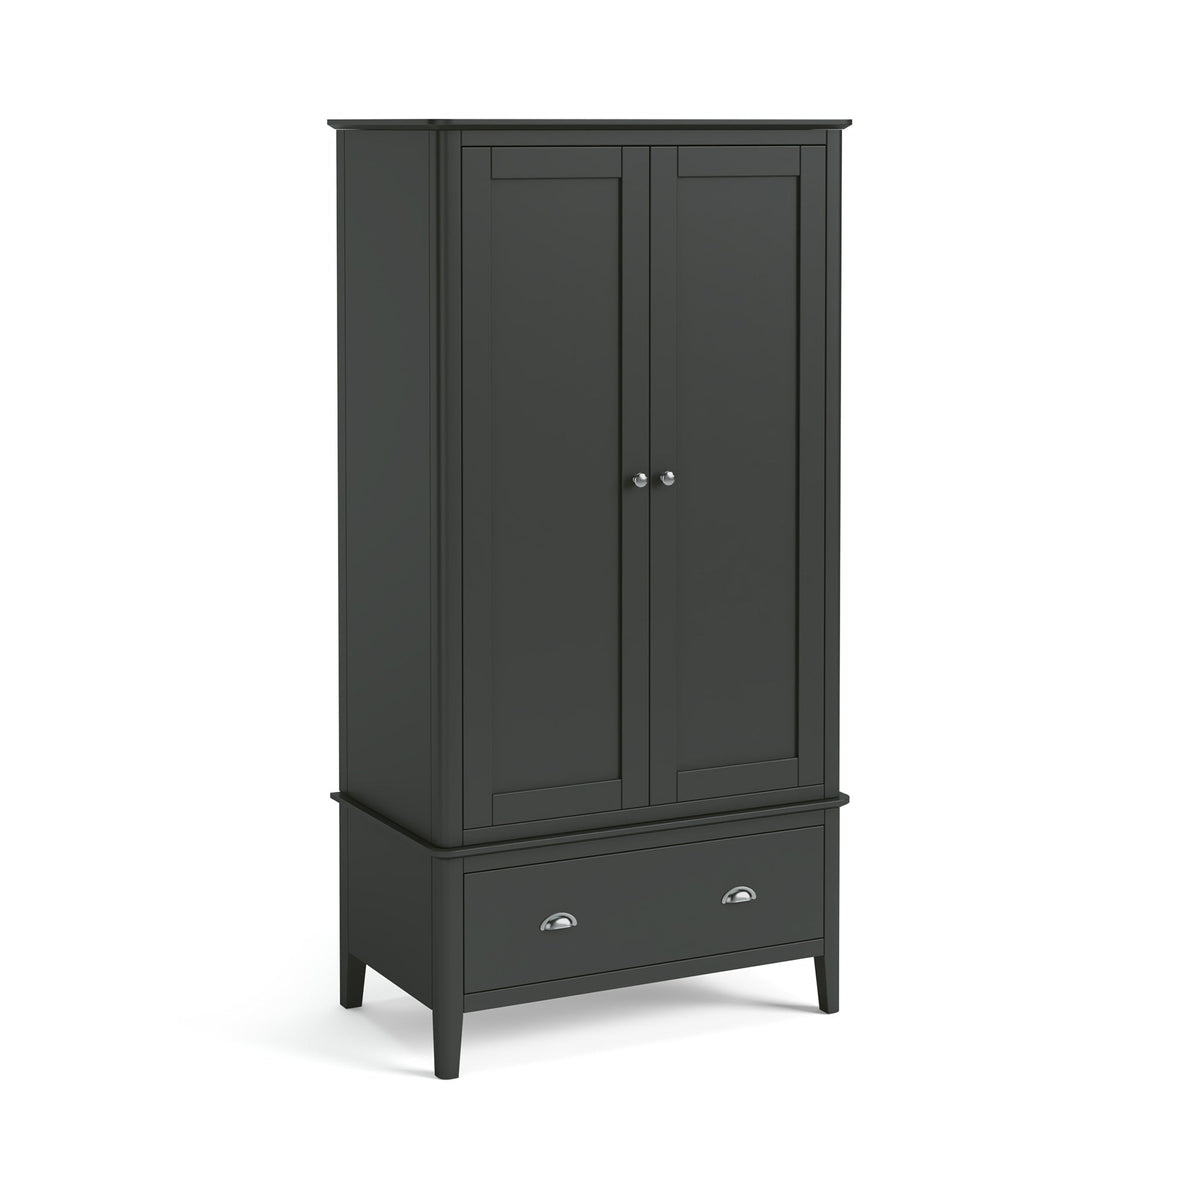 Dumbarton Charcoal Grey 2 Door Double Wardrobe with Drawer from Roseland Furniture